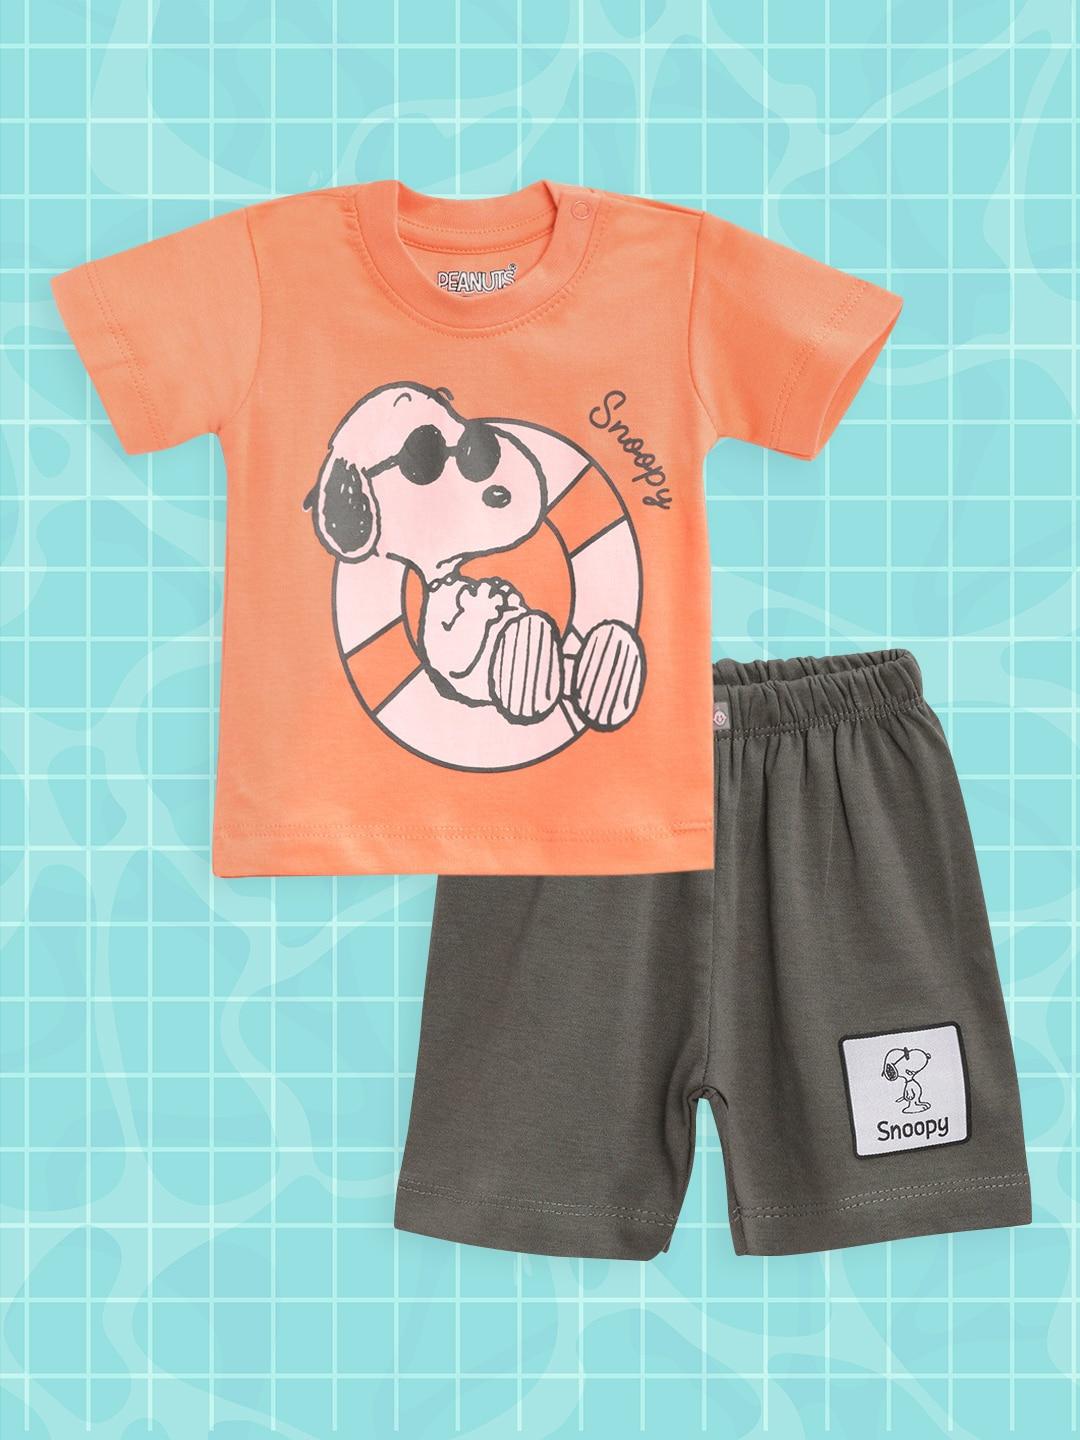 tinyo infant boys coral orange & charcoal grey pure cotton snoopy t-shirt with shorts